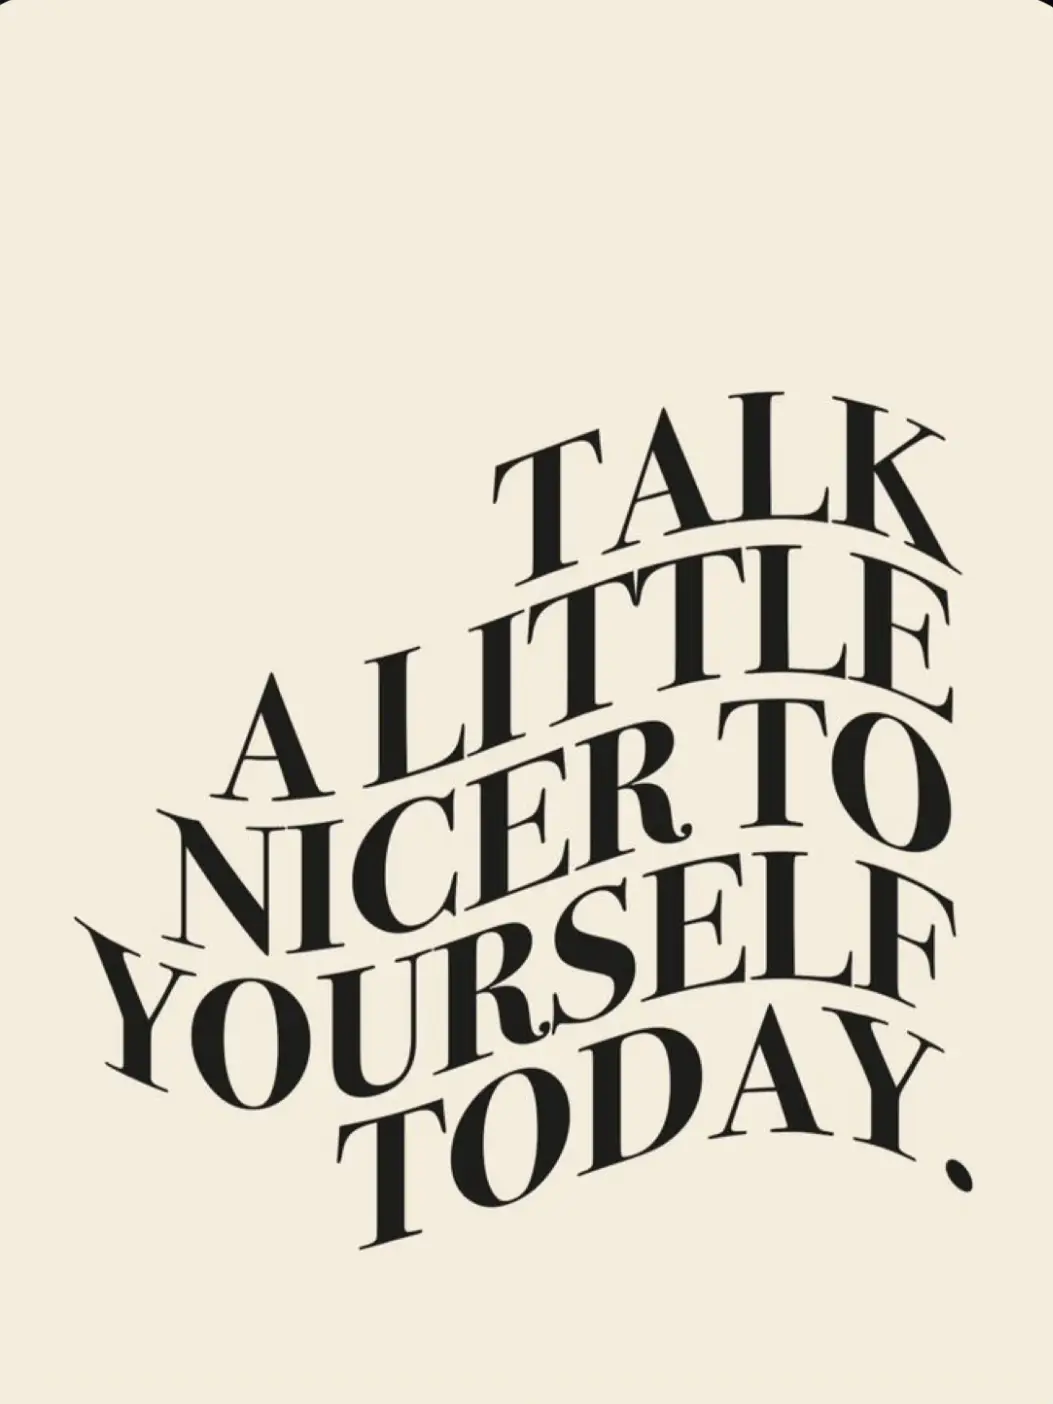  A white background with a black text that says "Talk to yourself more gently."